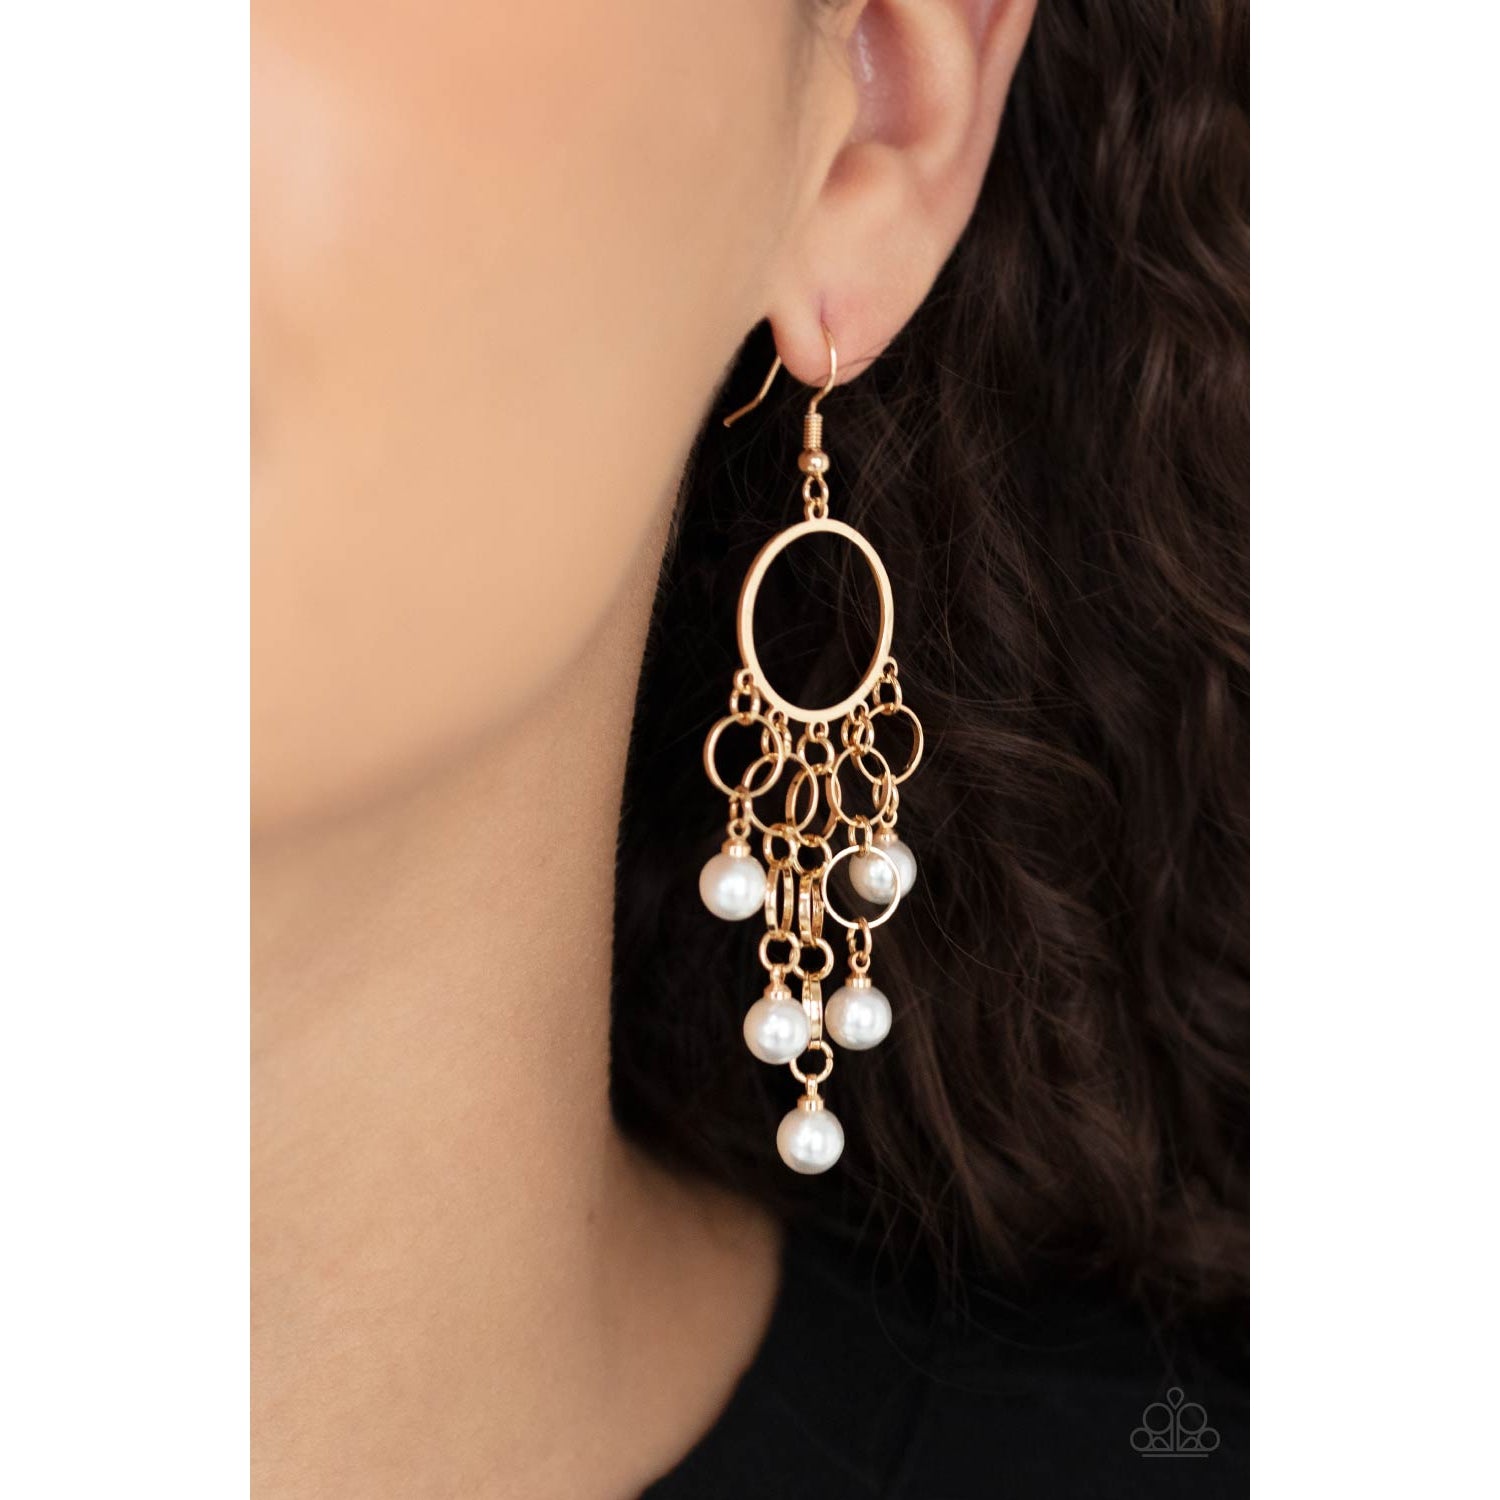 When Life Gives You Pearls - Gold and Pearl Earrings - Paparazzi Accessories - GlaMarous Titi Jewels